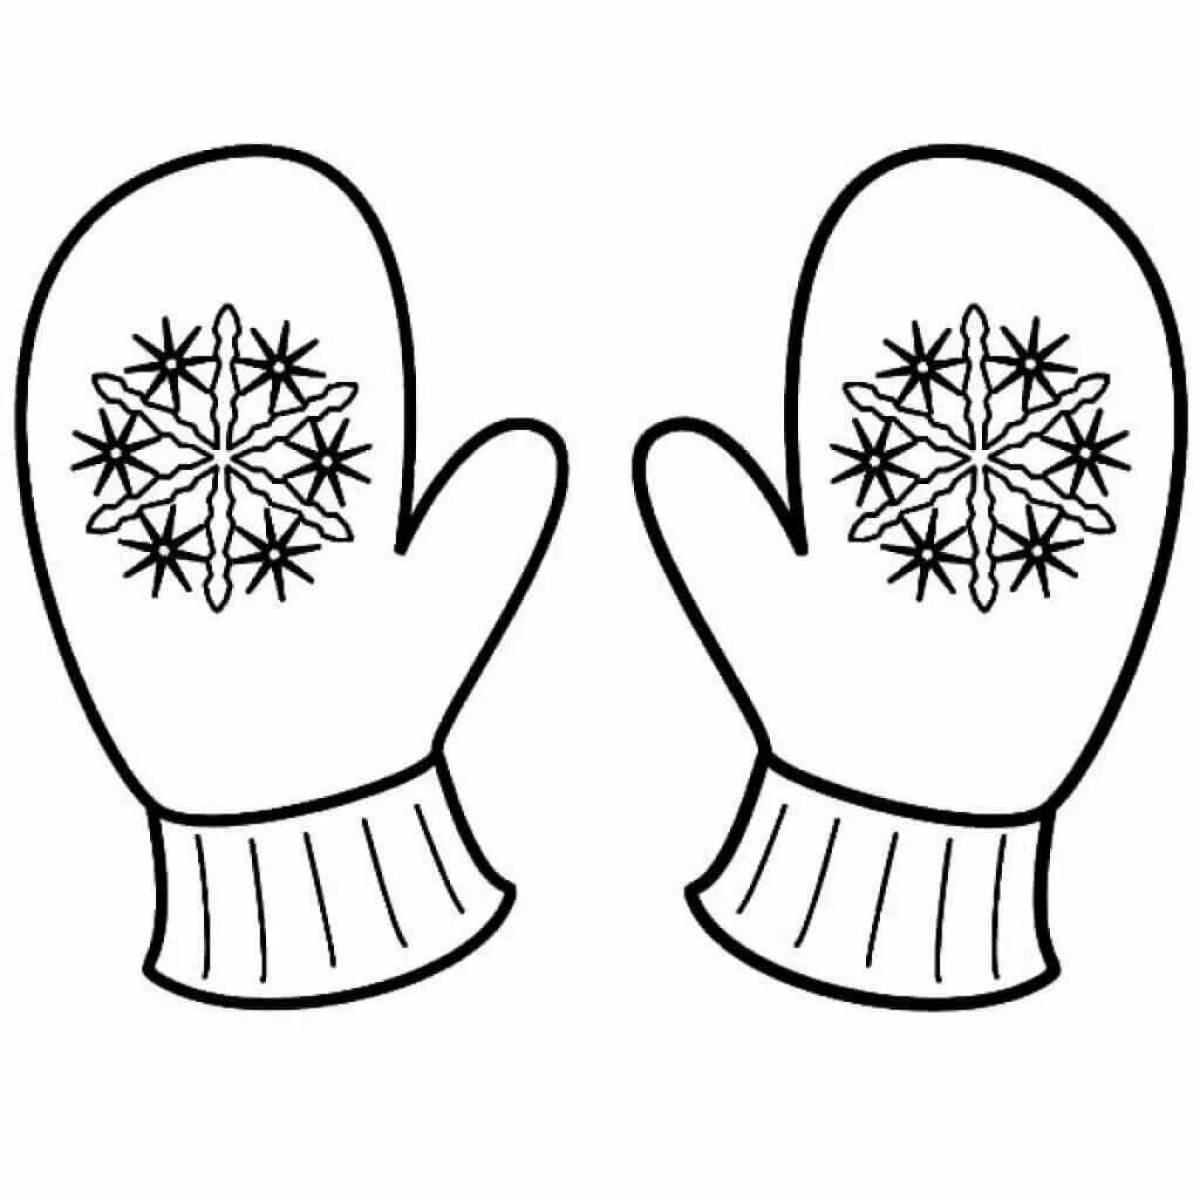 Coloring book shiny rubber mittens